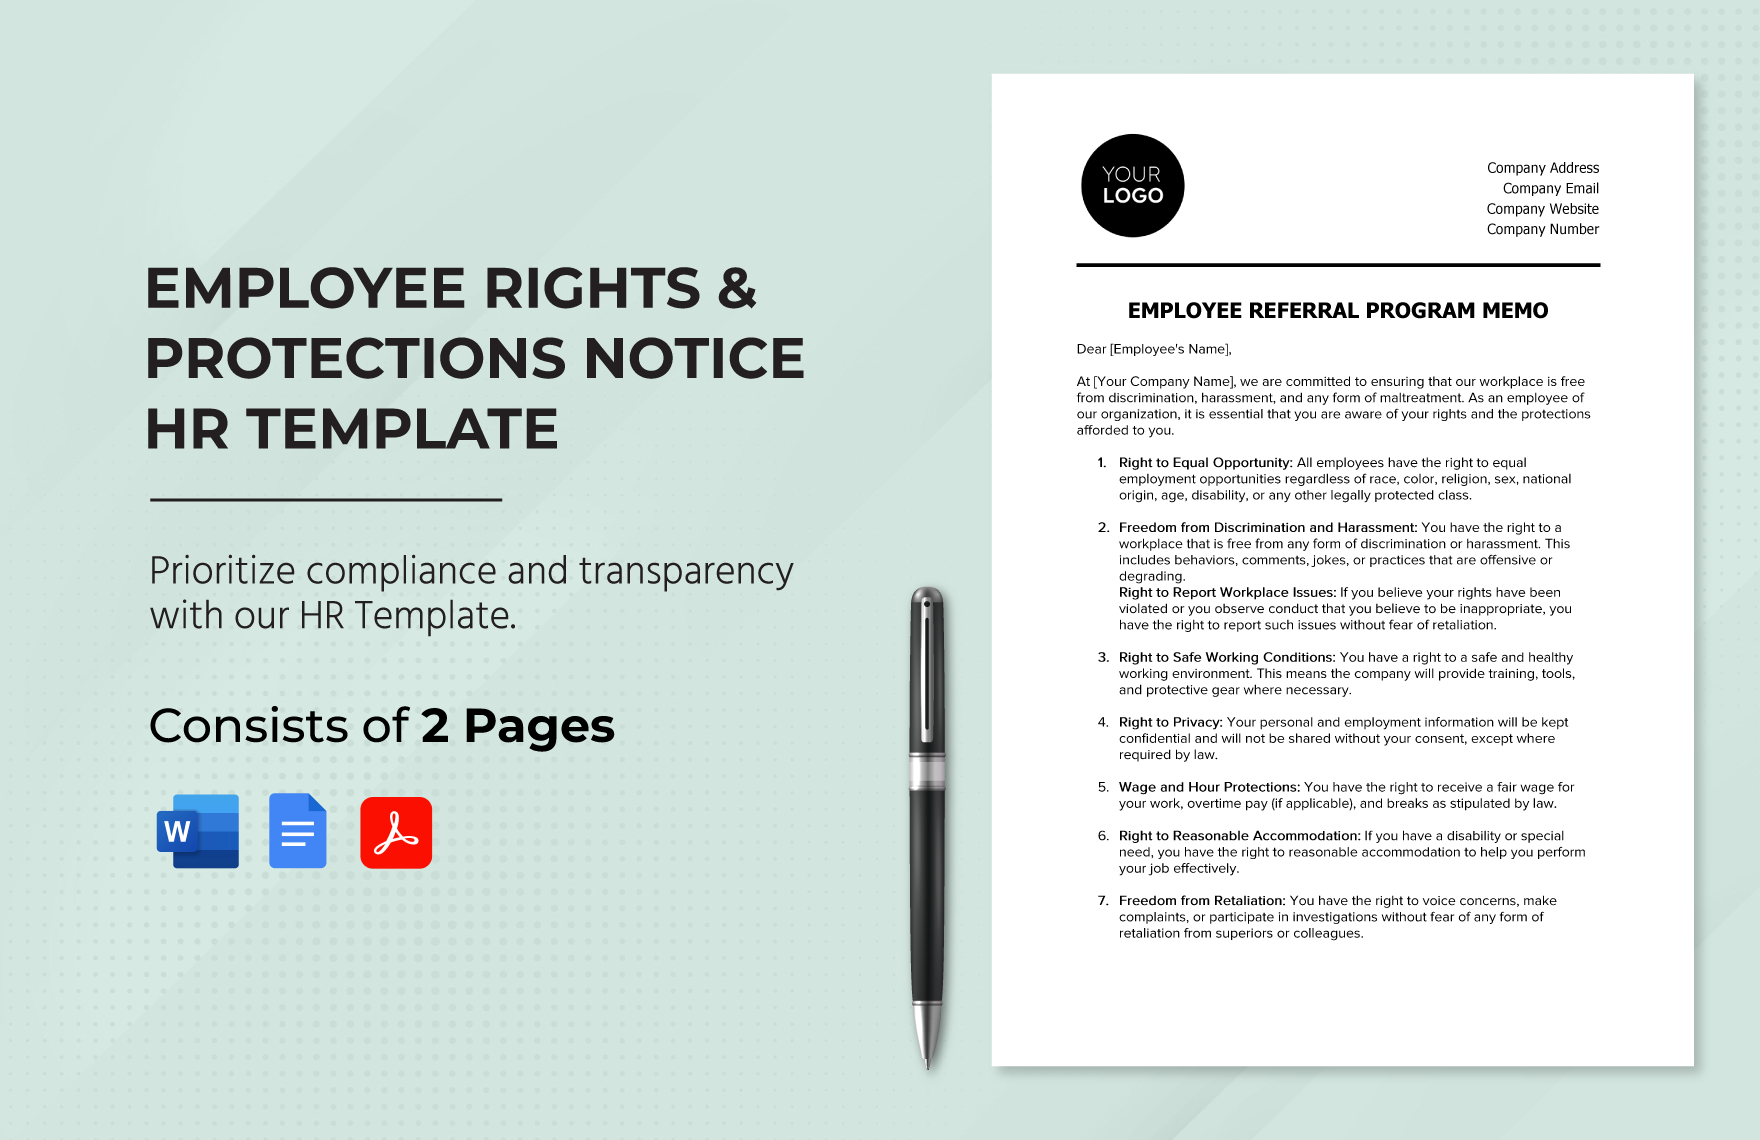 Employee Rights & Protections Notice HR Template